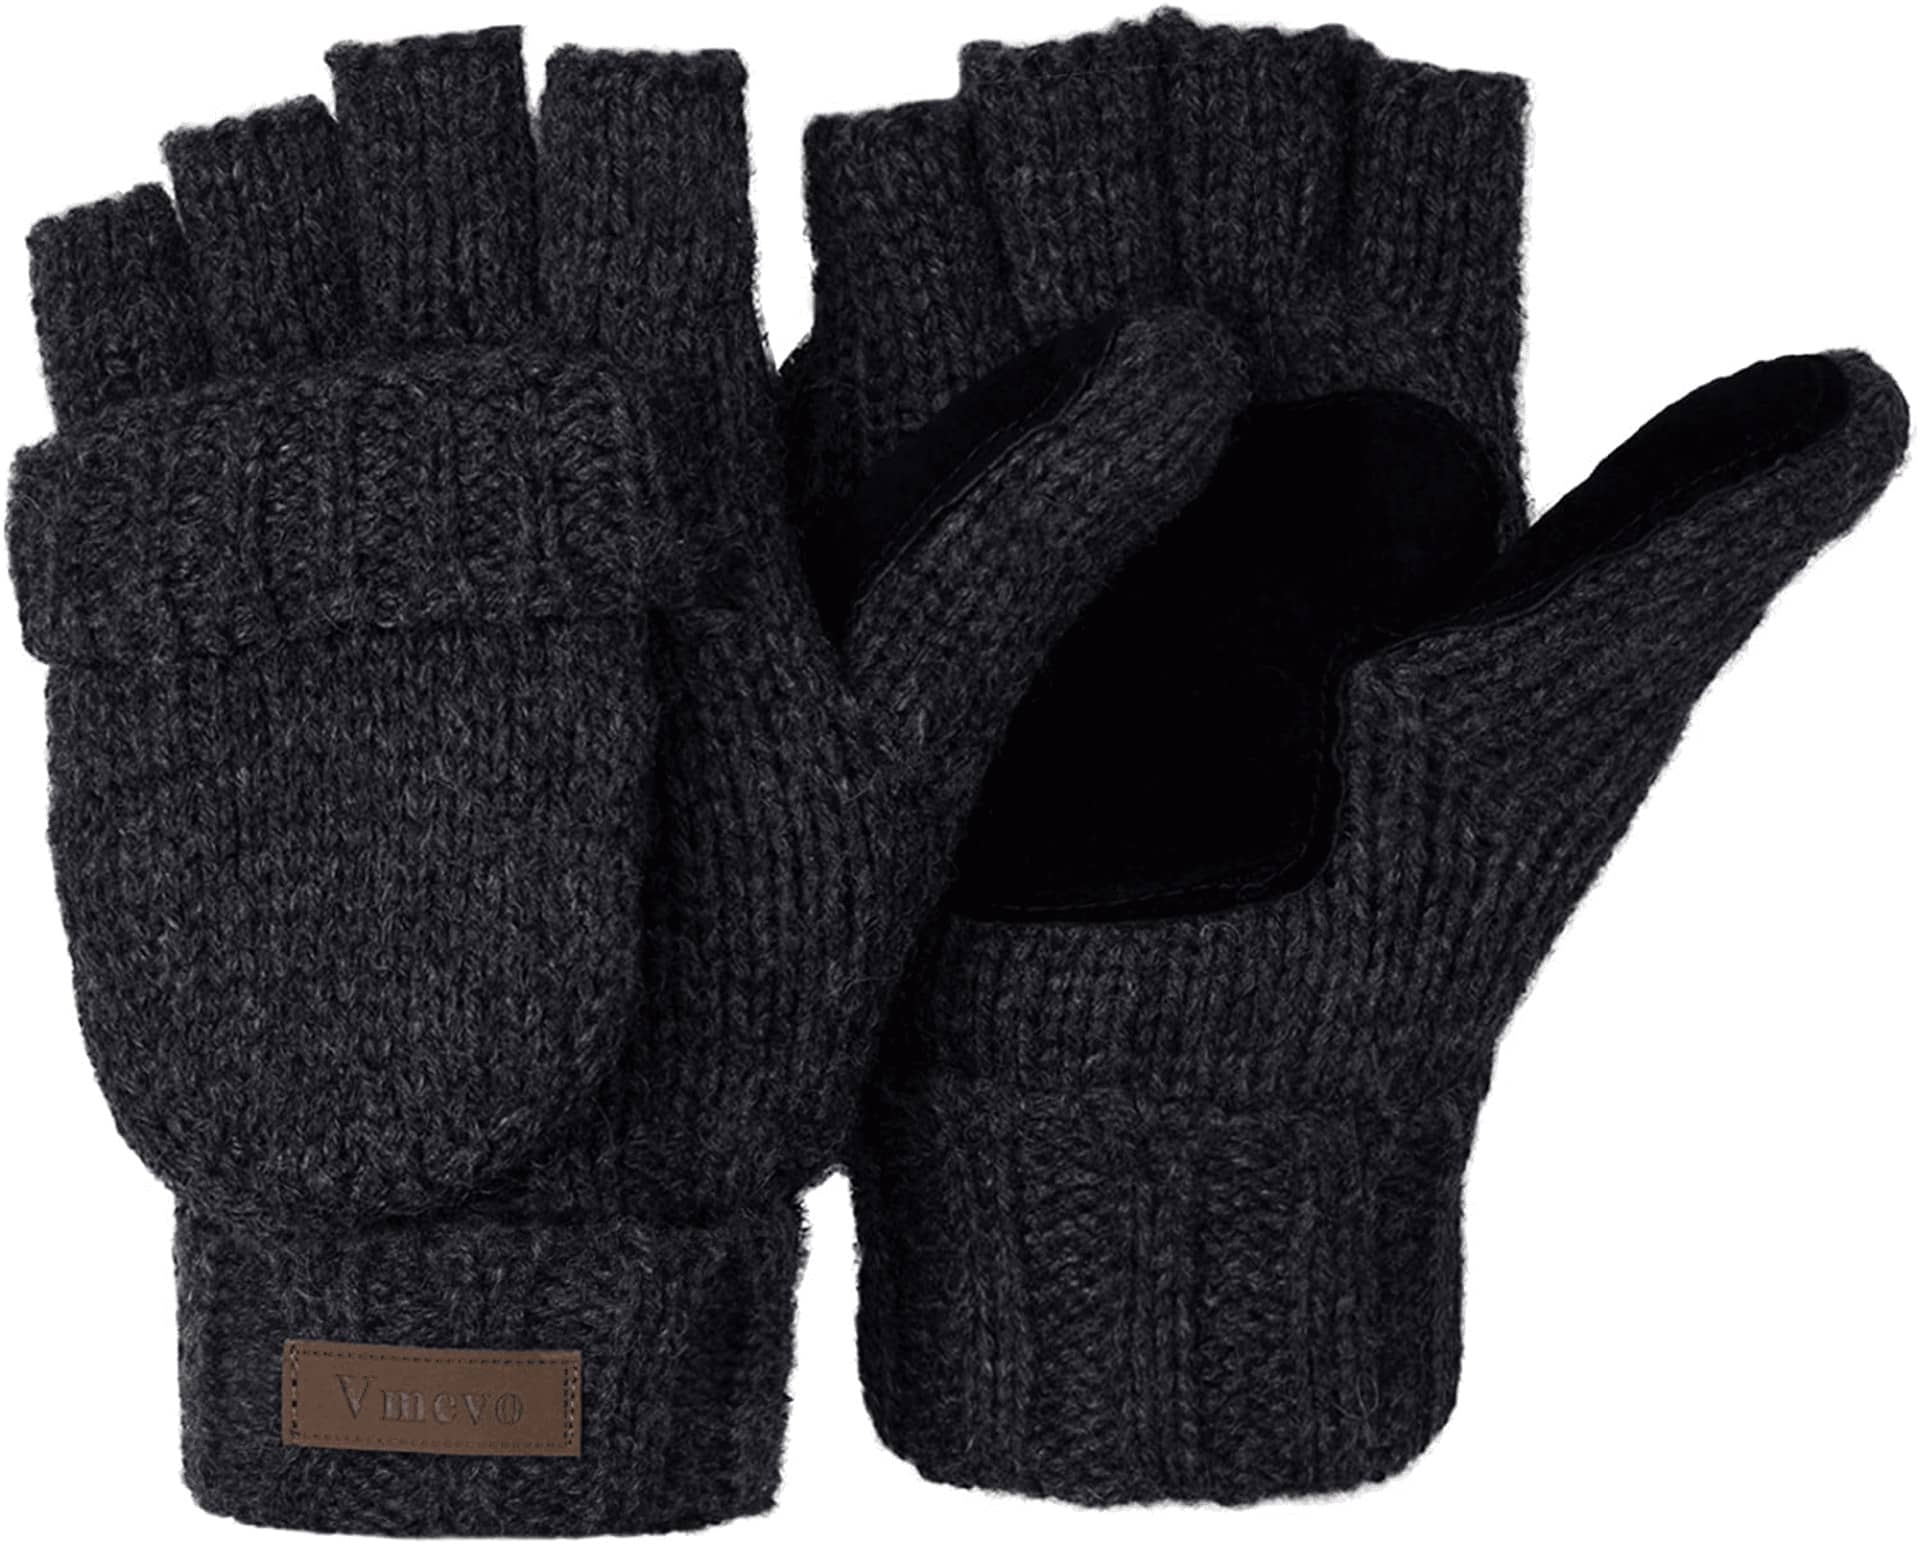 Best Photo Gifts for Photographers - Ideas Photographer Lovers - Photography Gloves